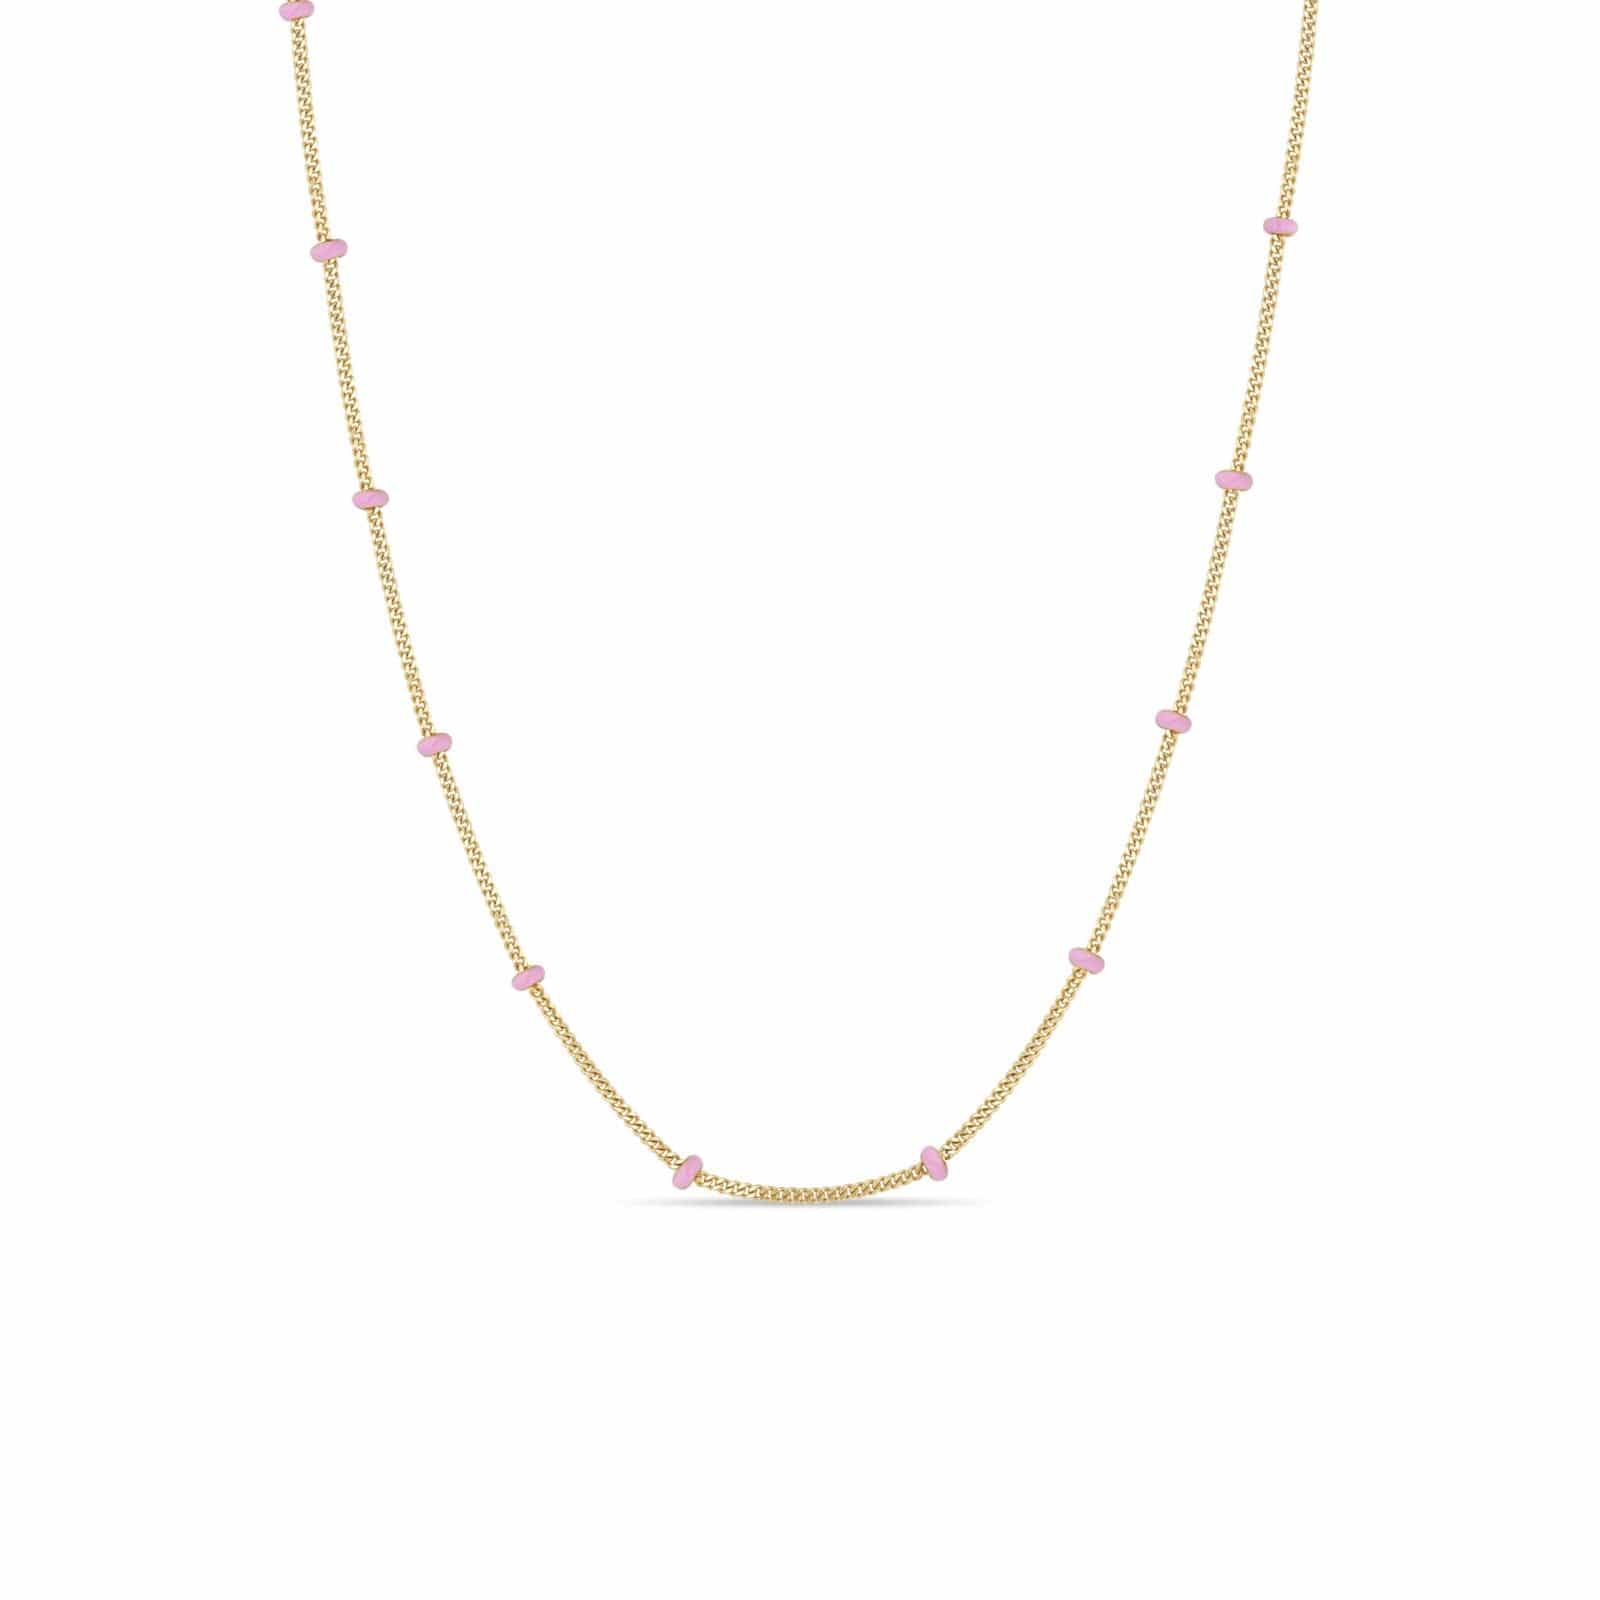 14K Yellow Gold Pink Enamel Curb Satellite Chain Necklace